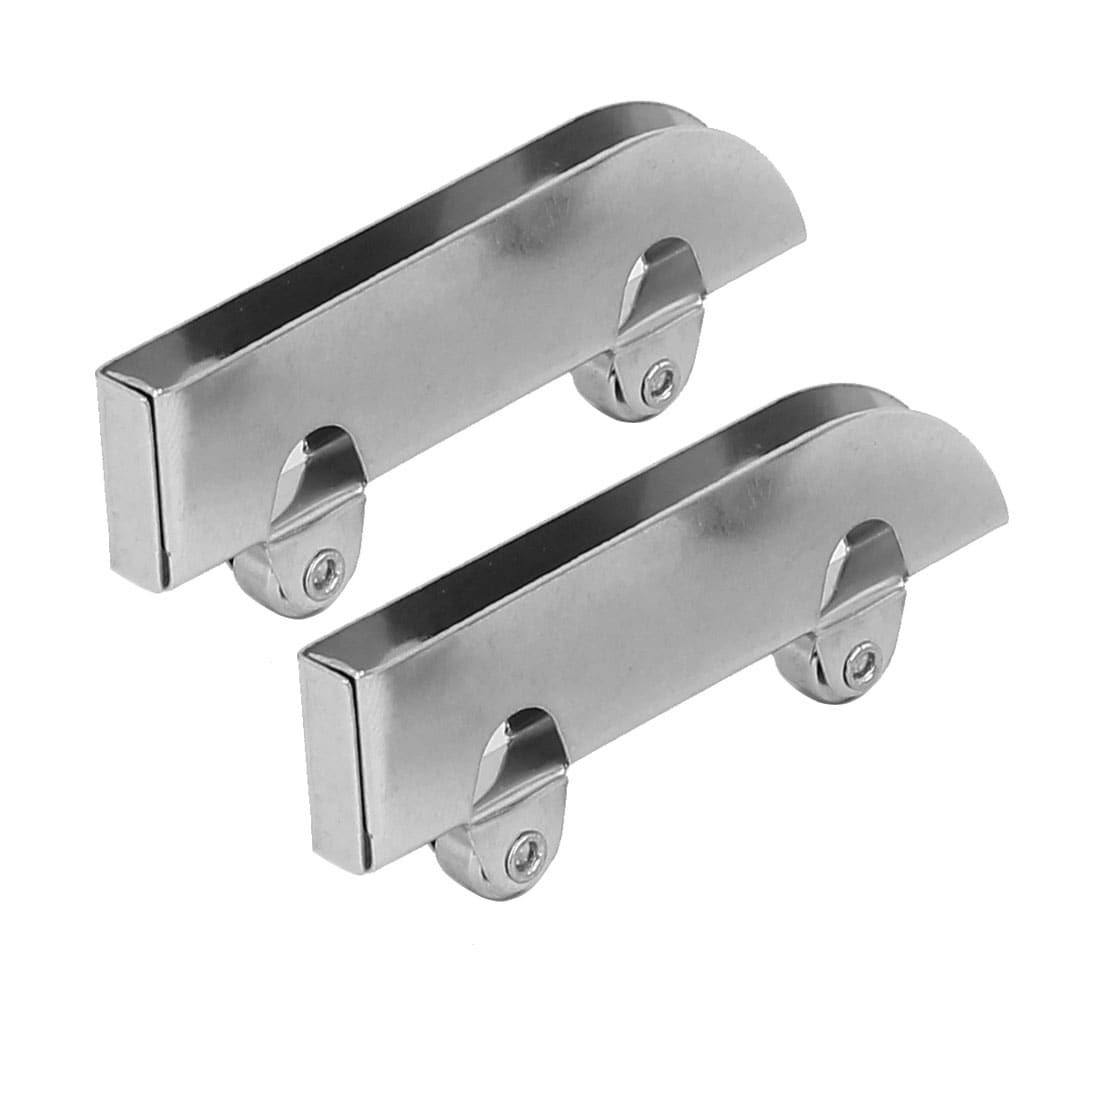 Showcase Door Sliding Rollers Clamp Wheels Pulleys 2pcs for 8mm Thickness Glass 